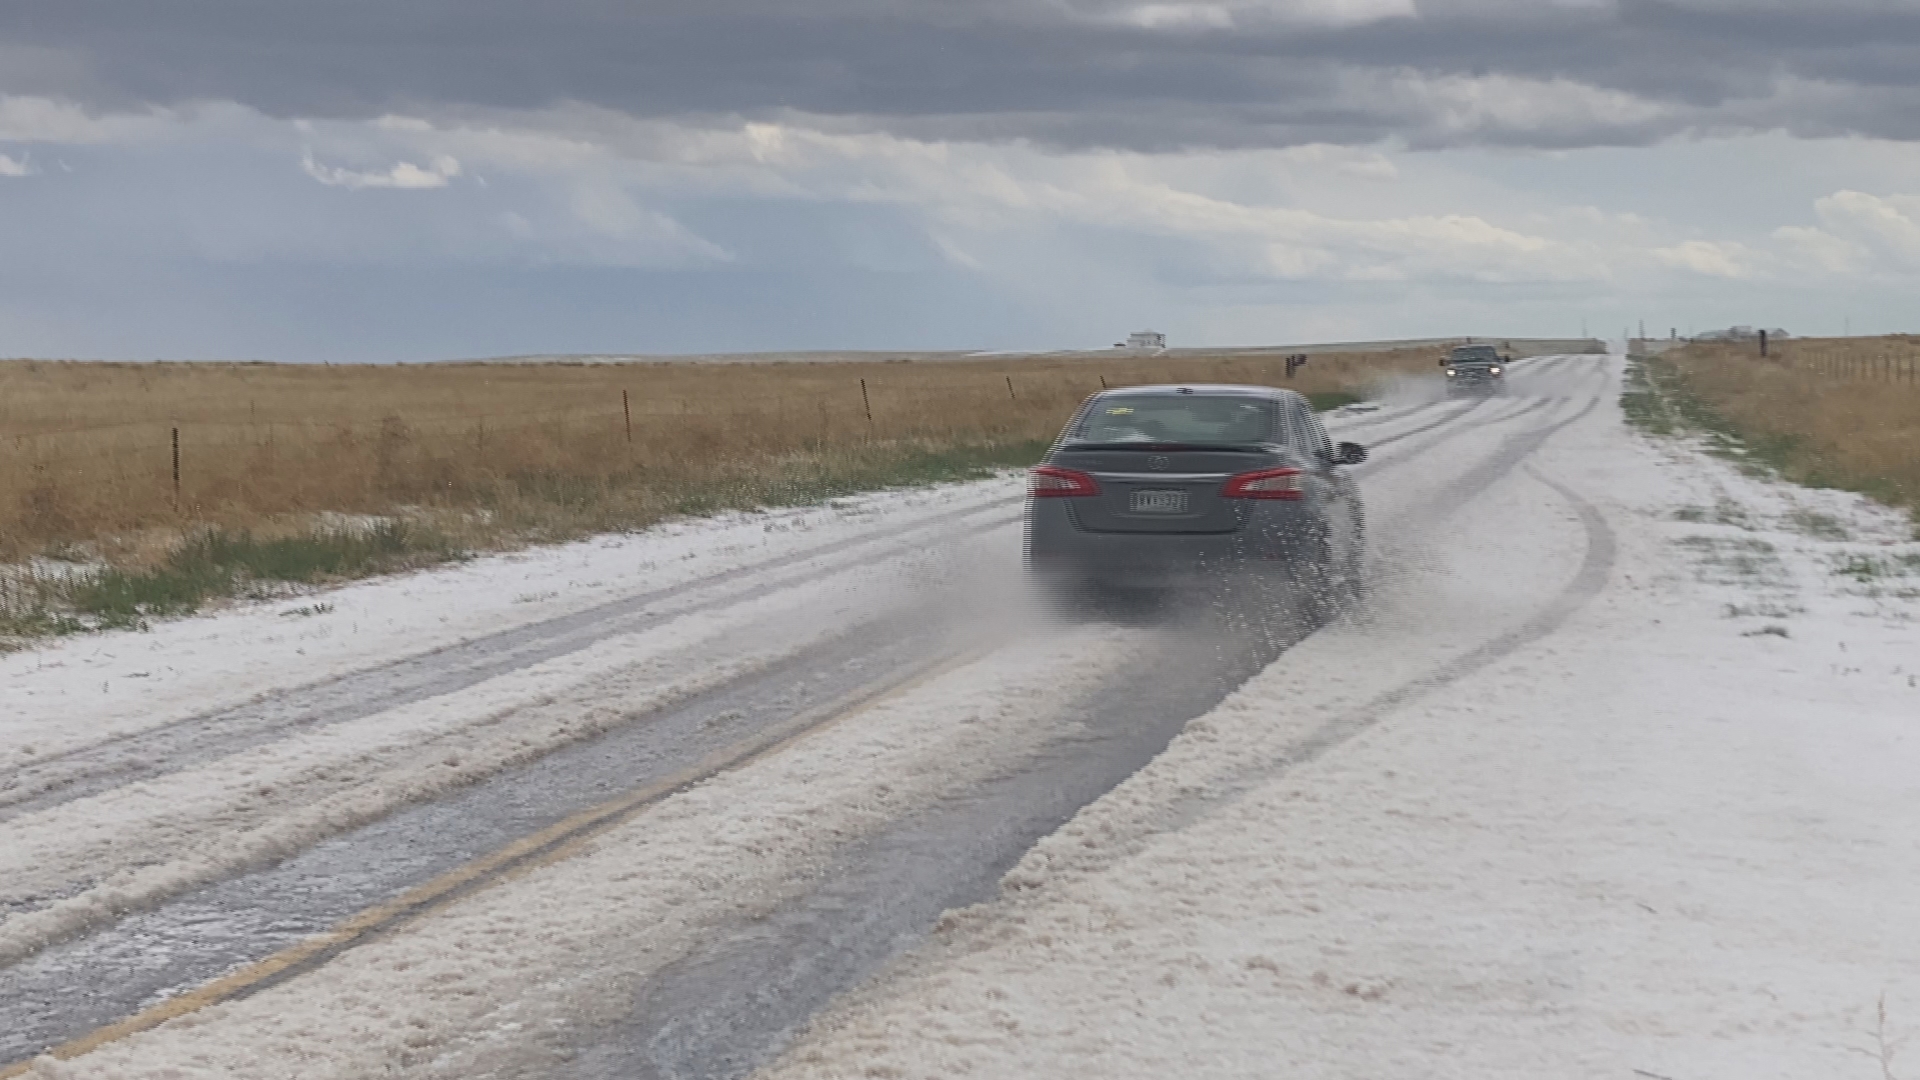 Heavy hail fell as storms moved through parts of Colorado on Wednesday.